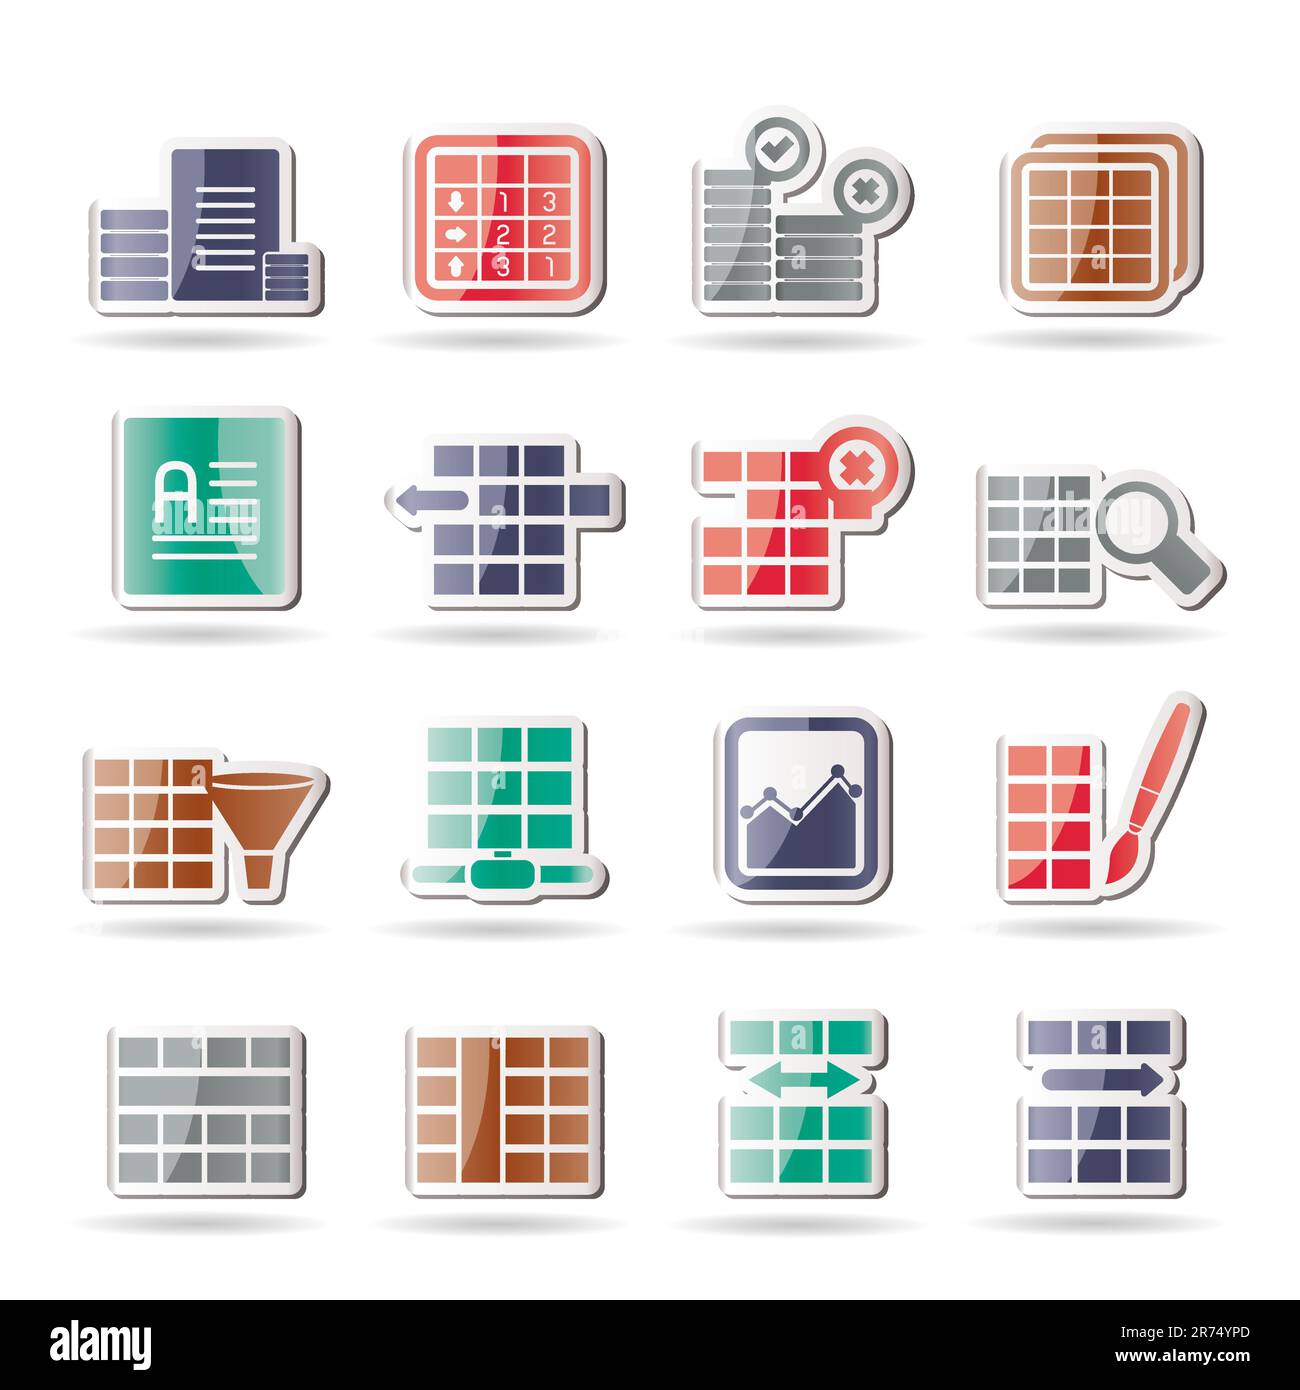 Database and Table Formatting Icons - Vector Icon Set Stock Vector